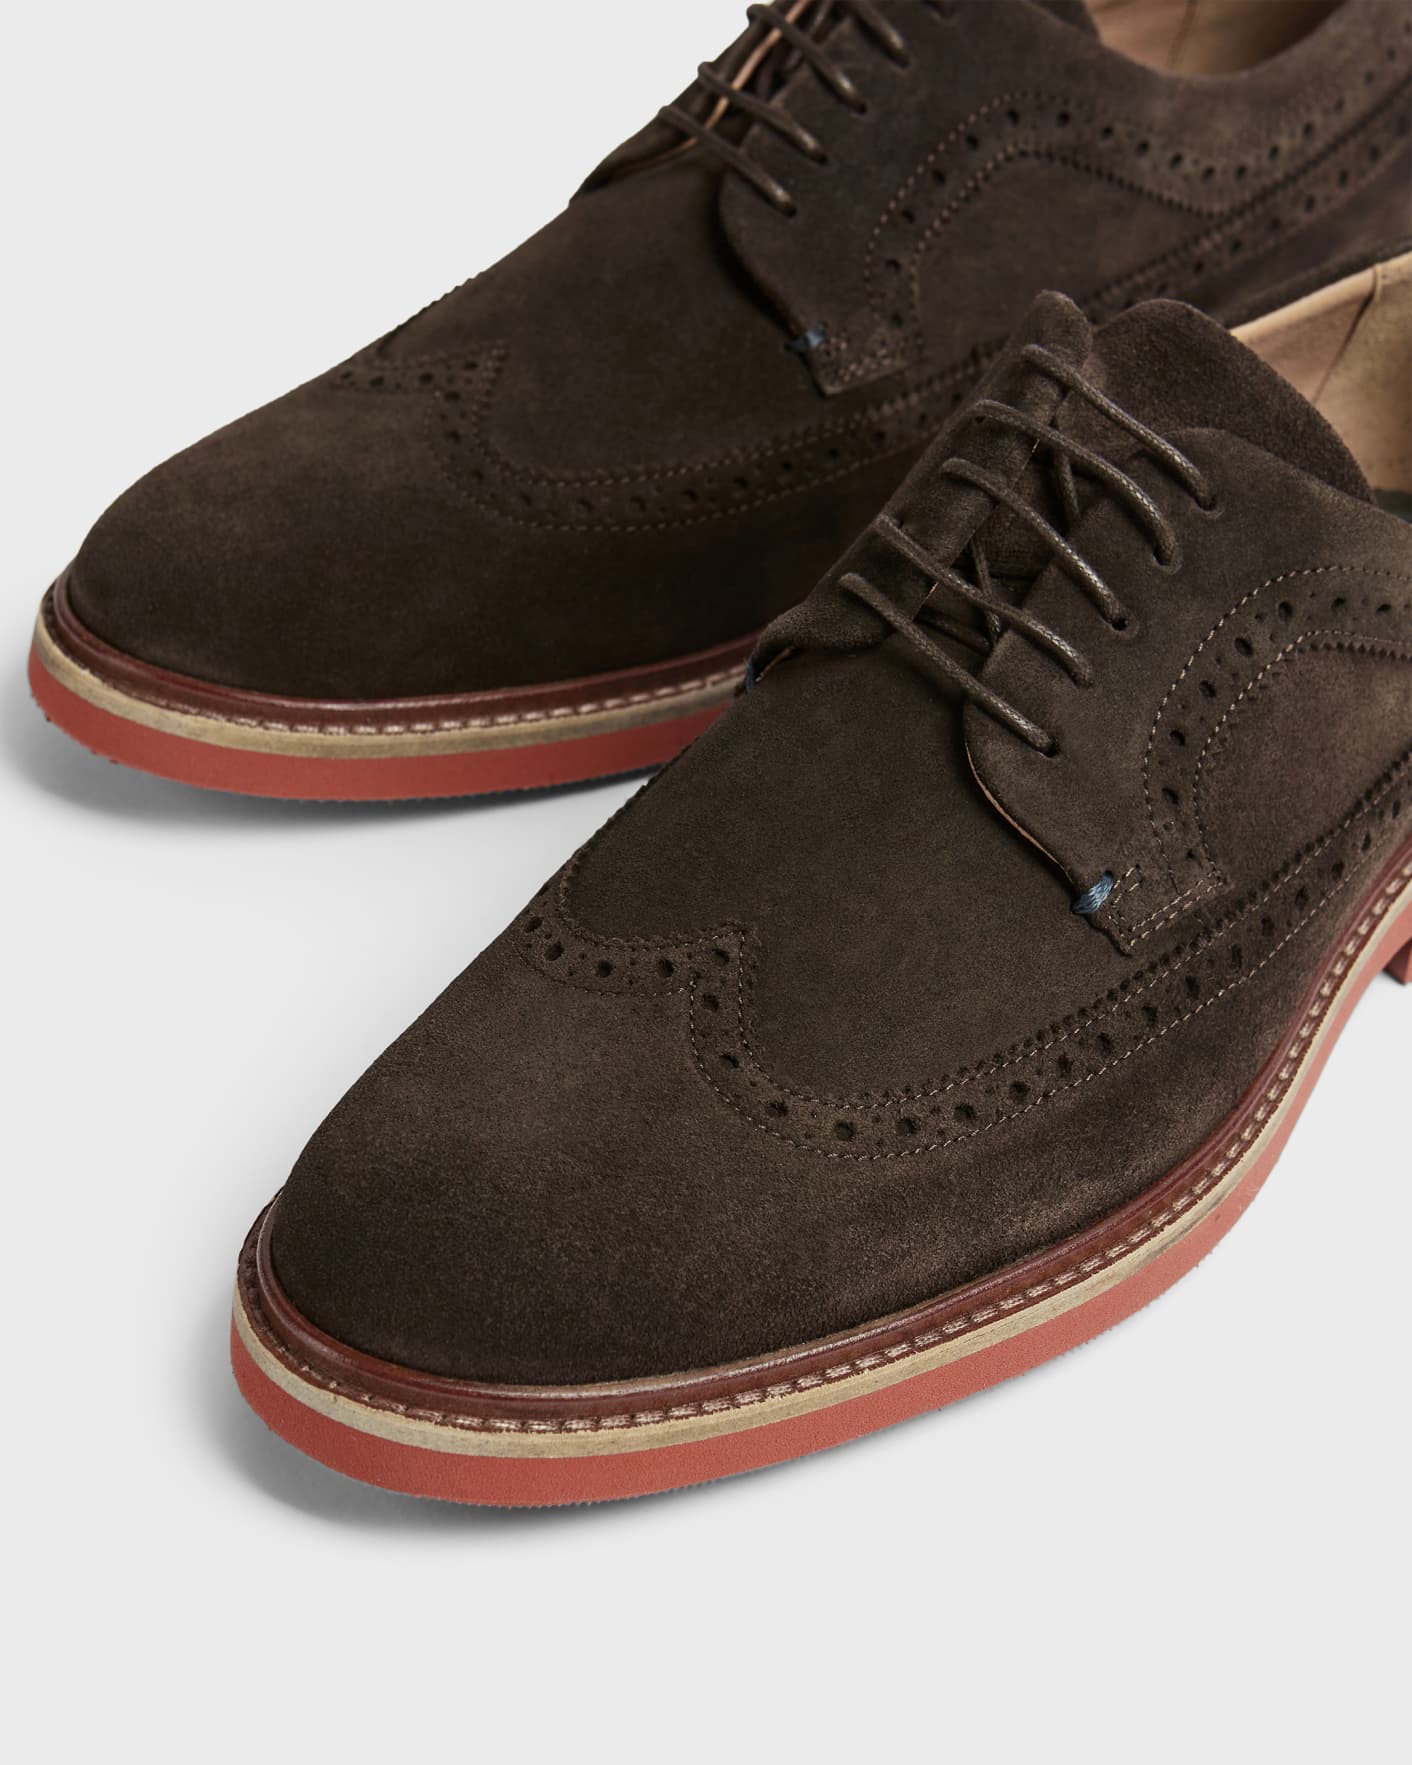 Brown Smart Casual long wing brogue Ted Baker